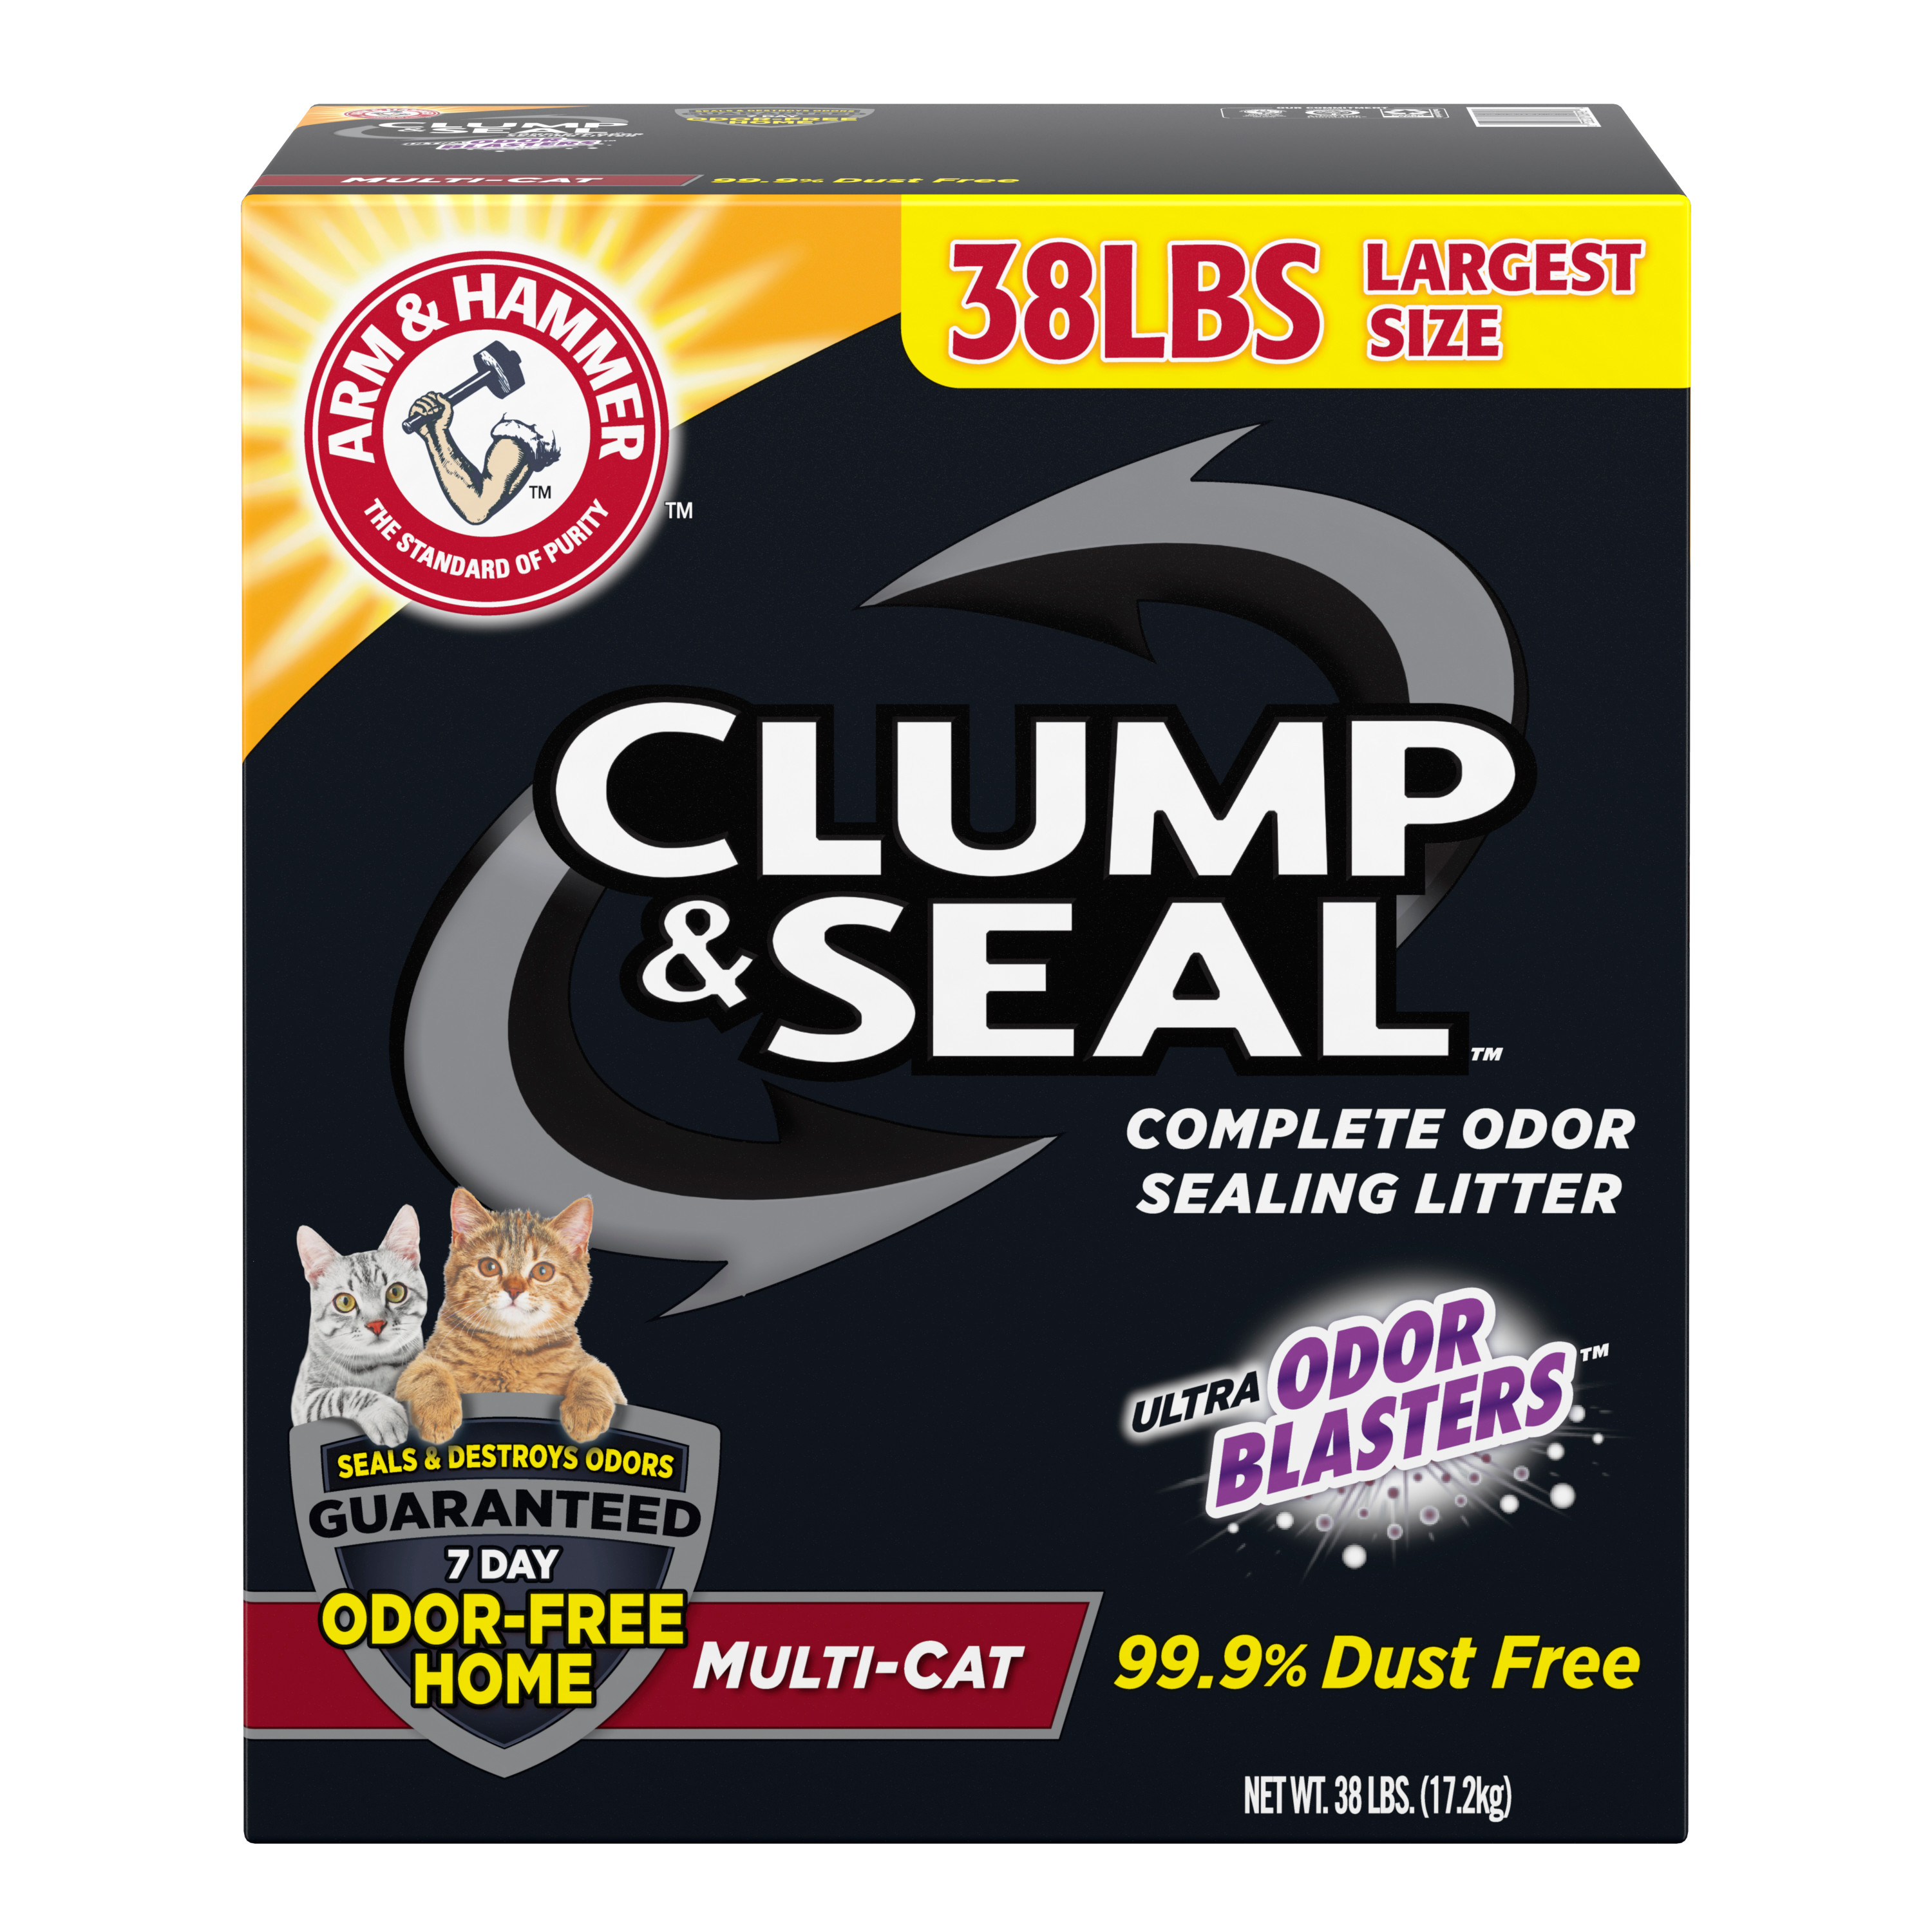 ARM & HAMMER Clump & Seal Cat Litter Multi-Cat Complete Odor Sealing Clay Clumping Cat Litter, 38 lb - image 1 of 10